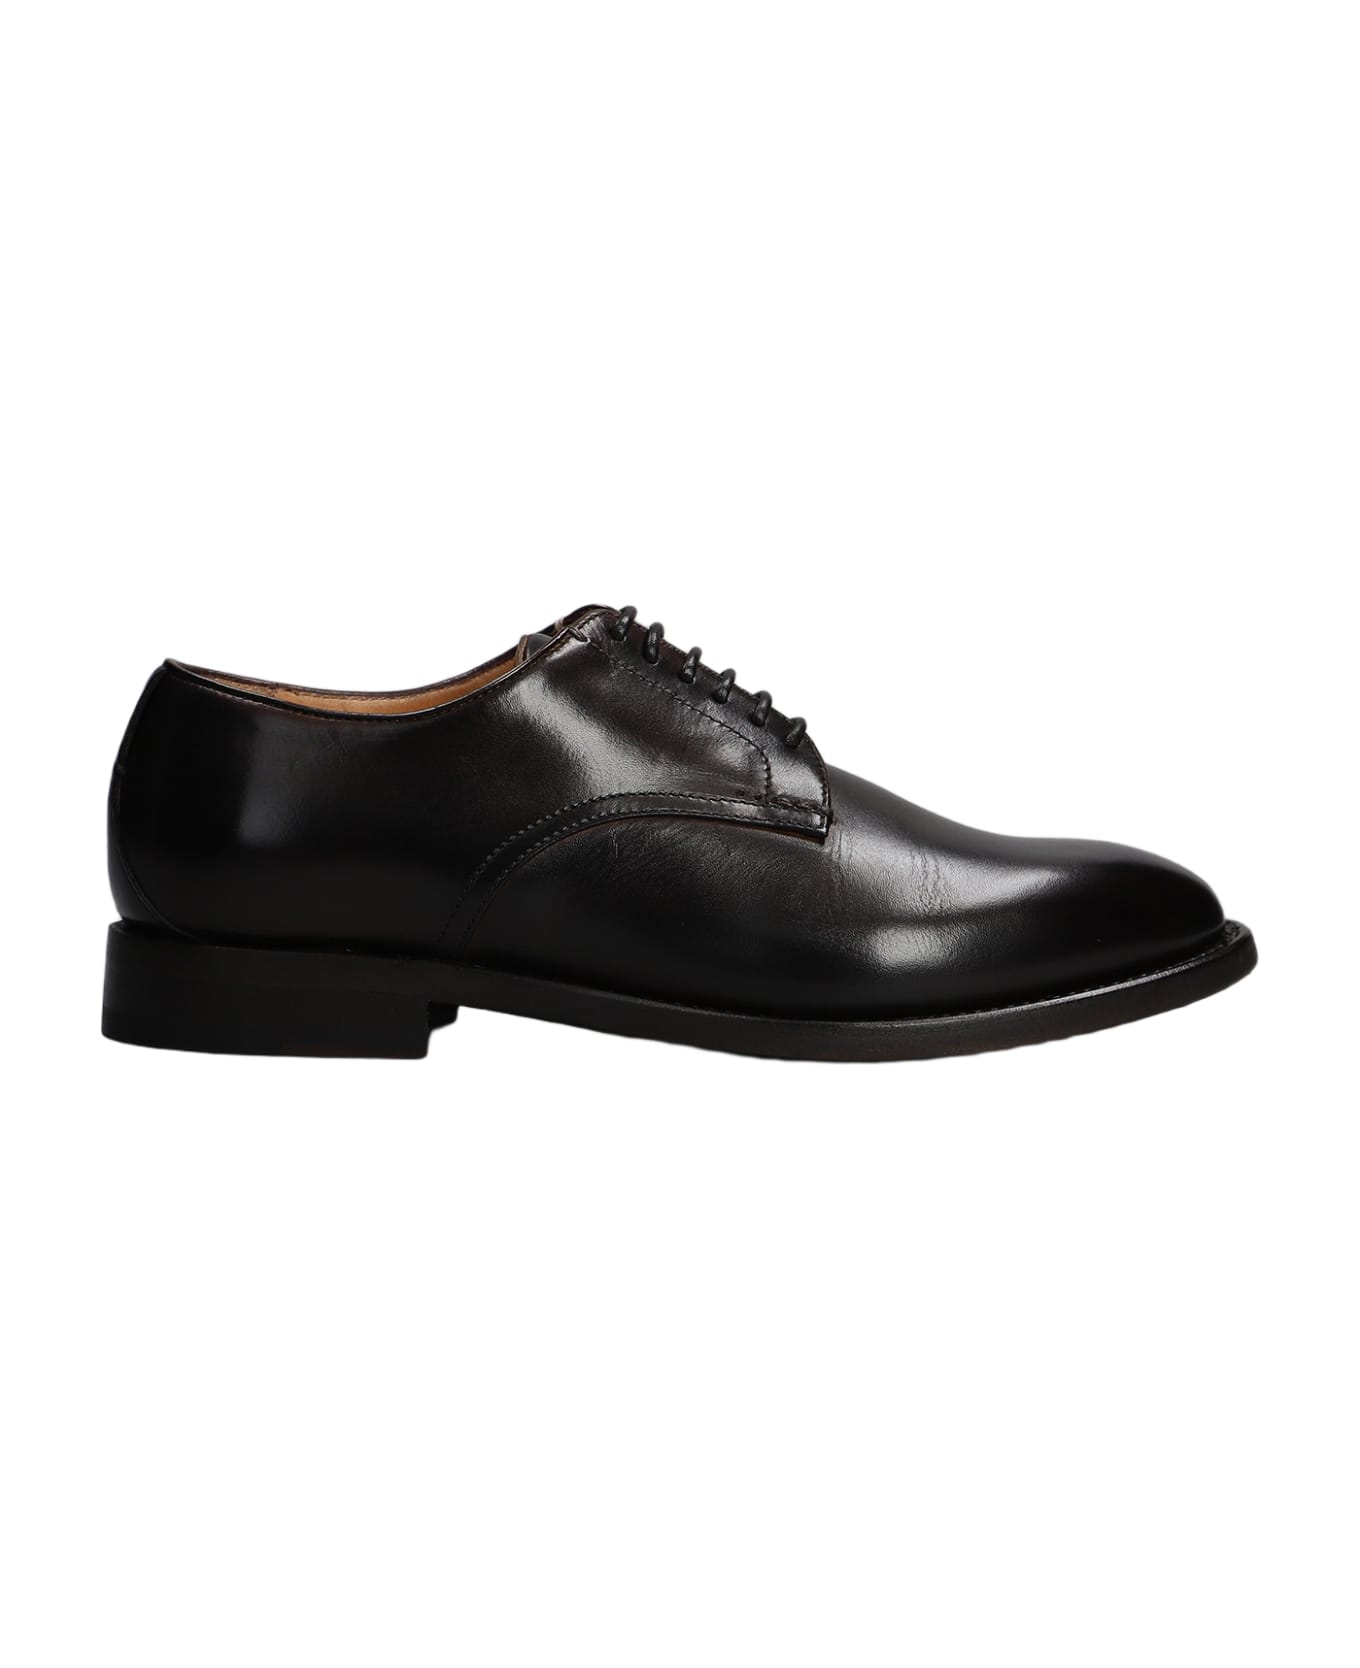 Silvano Sassetti Lace Up Shoes In Dark Brown Leather - dark brown